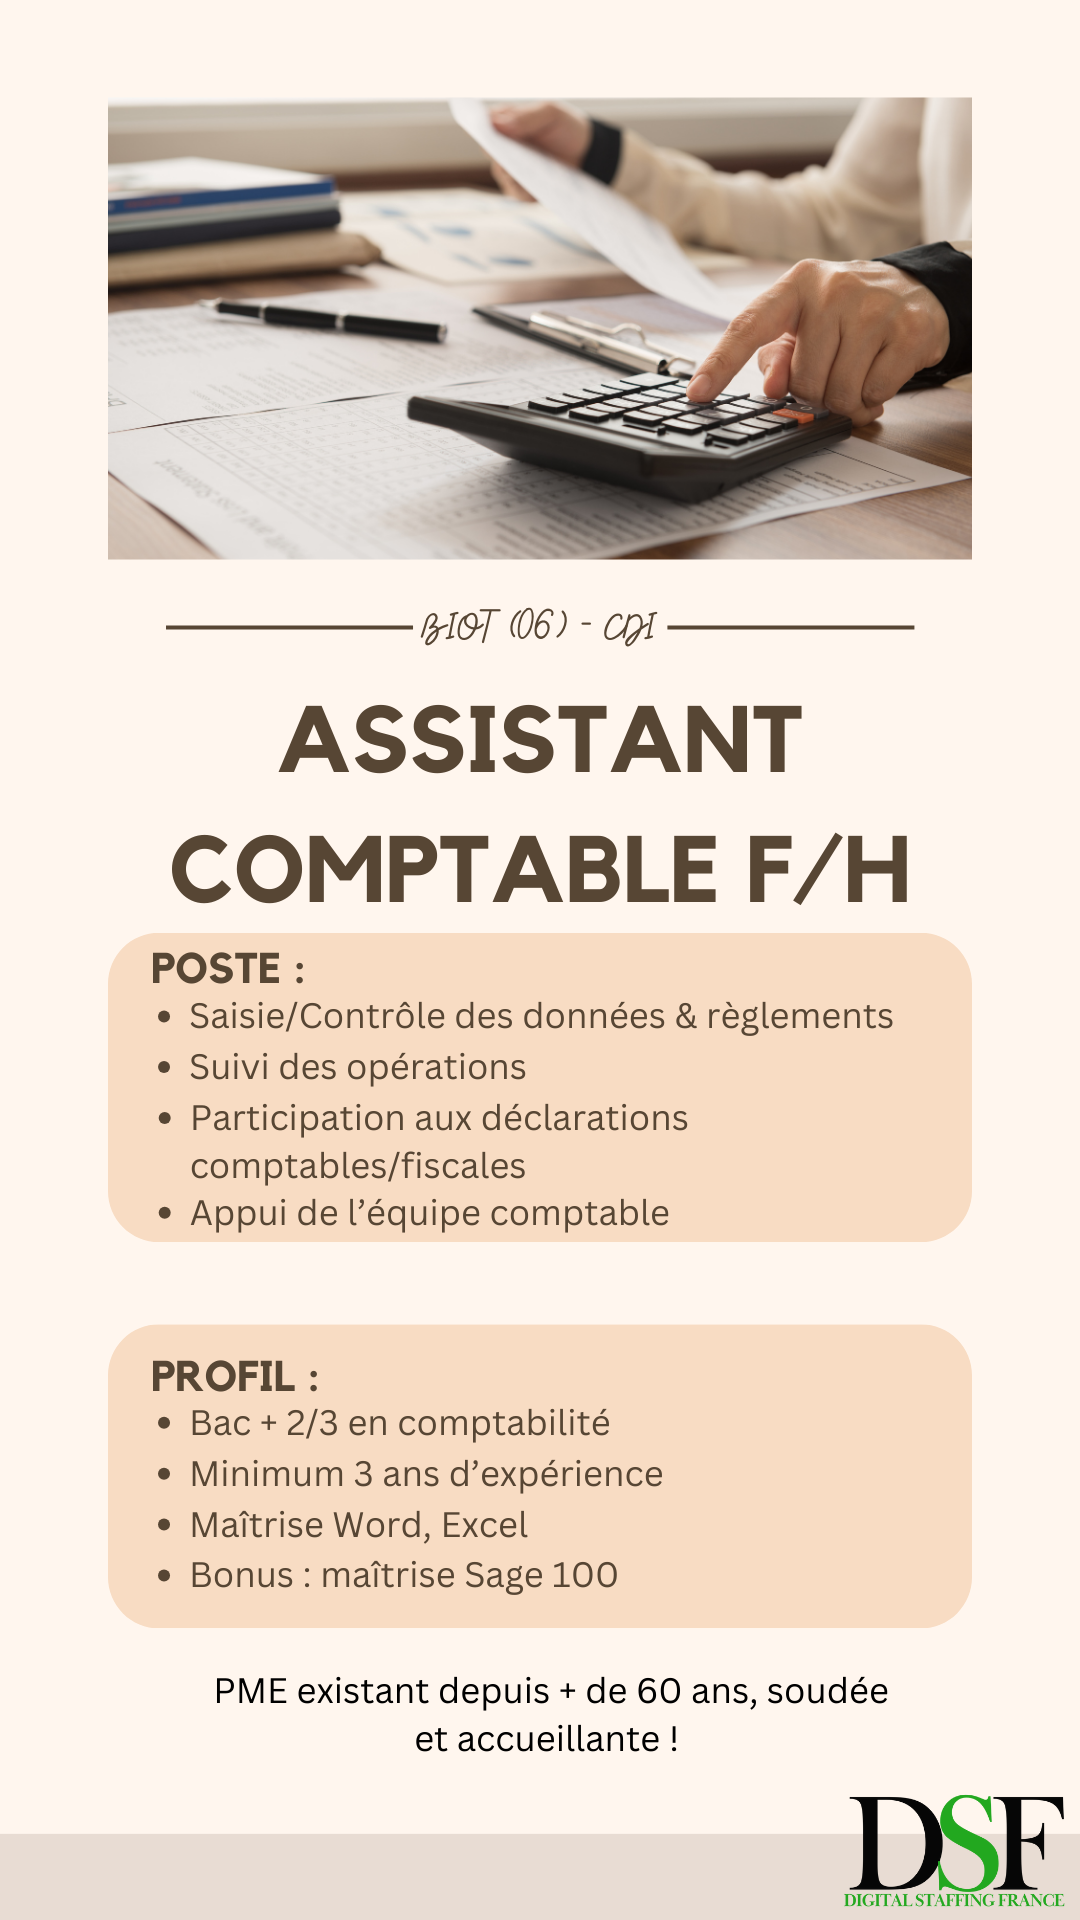 Assistant comptable F/H